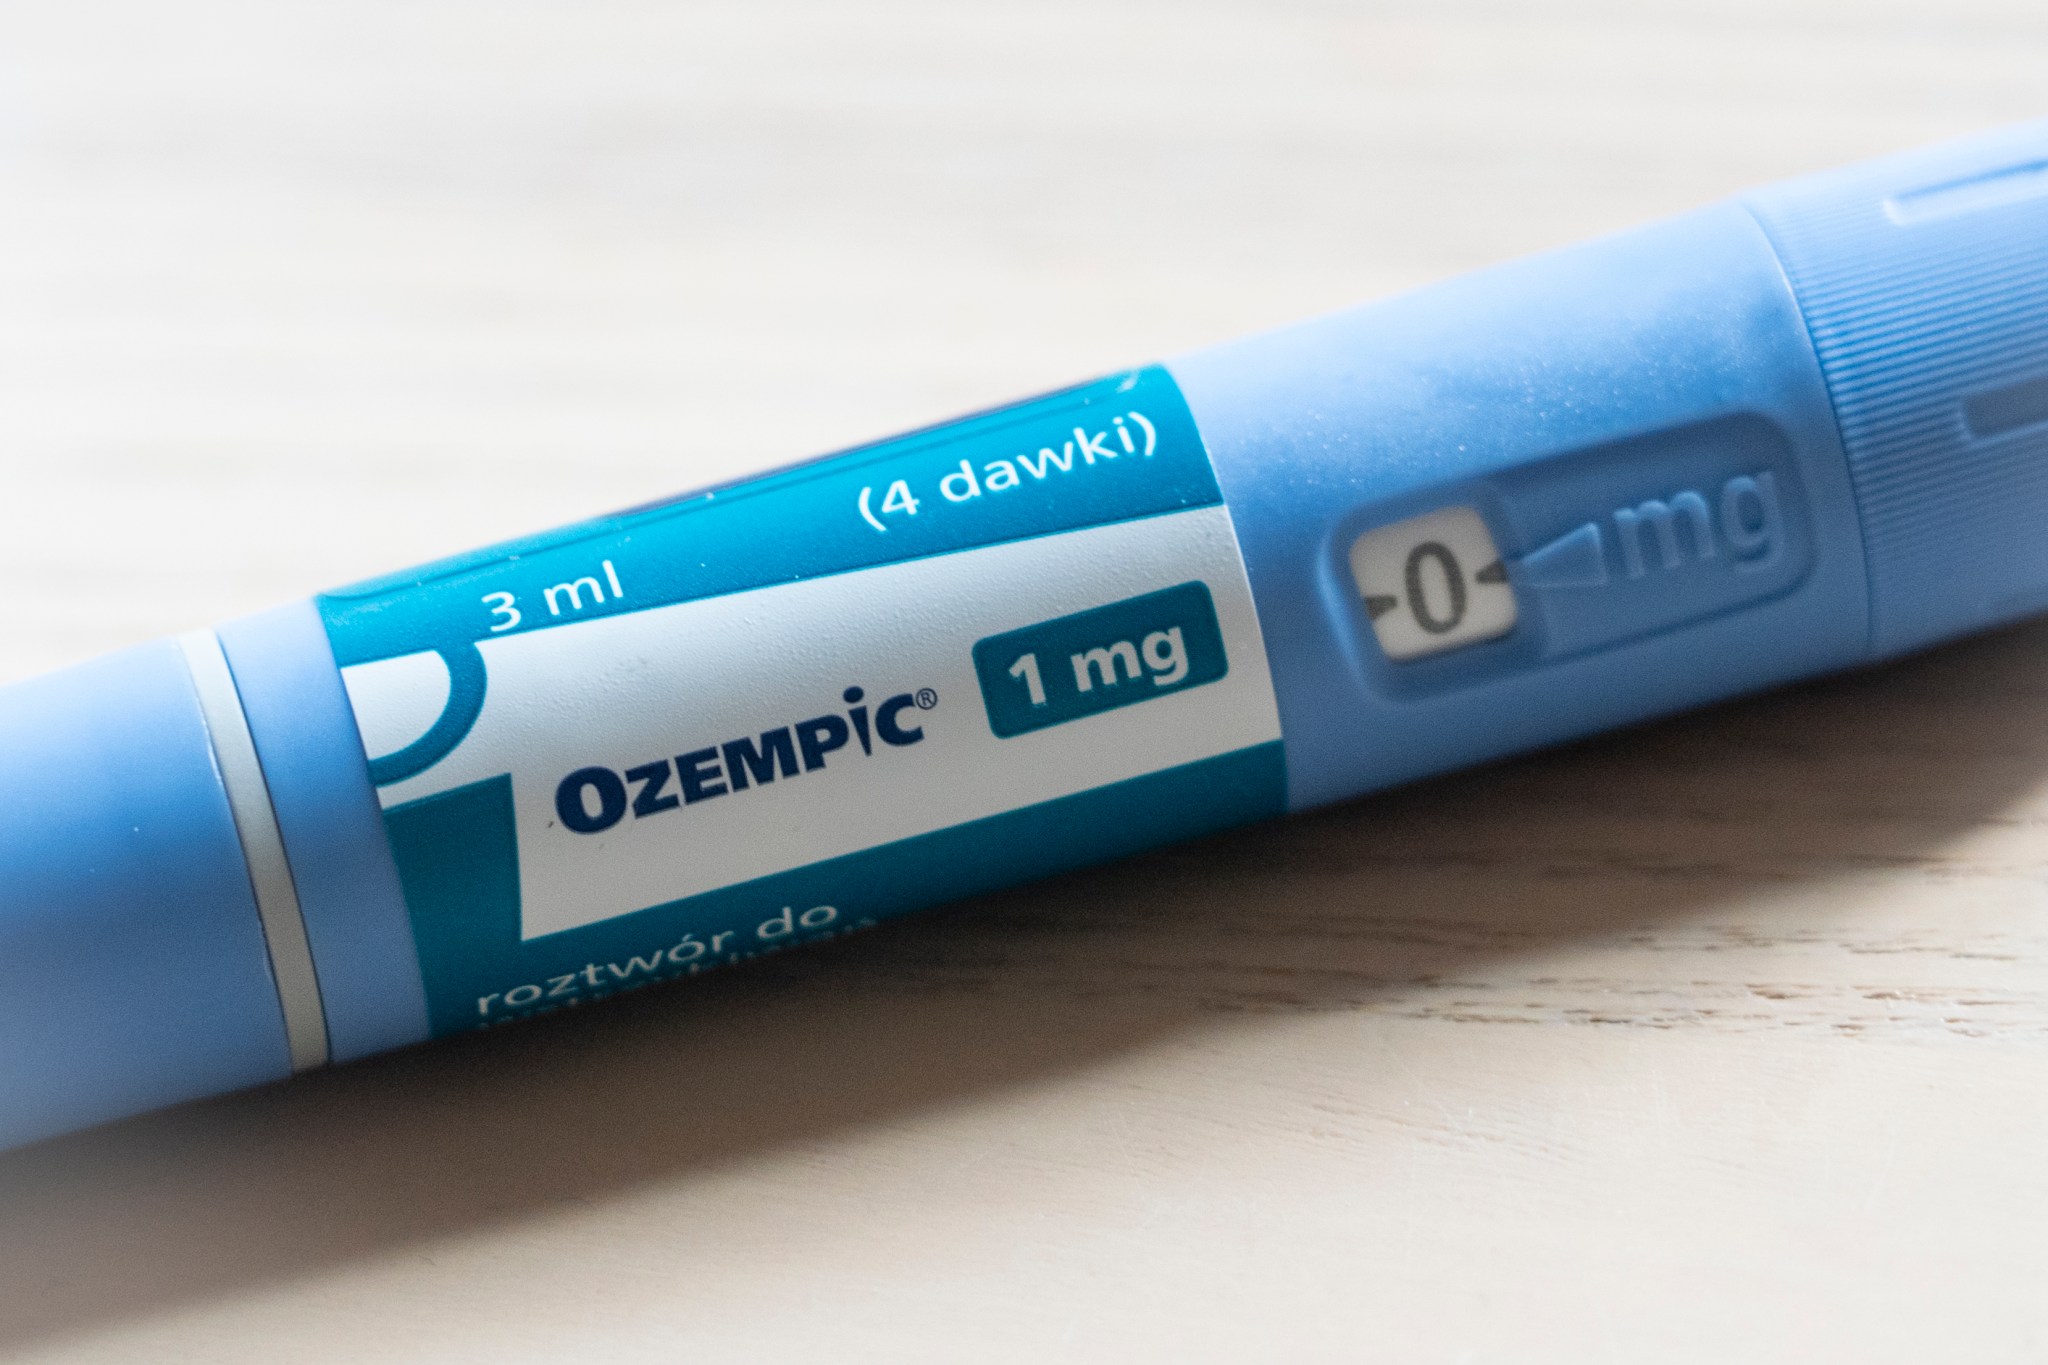 Semaglutides Wegovy and Ozempic improve blood sugar and reduce weight long-term